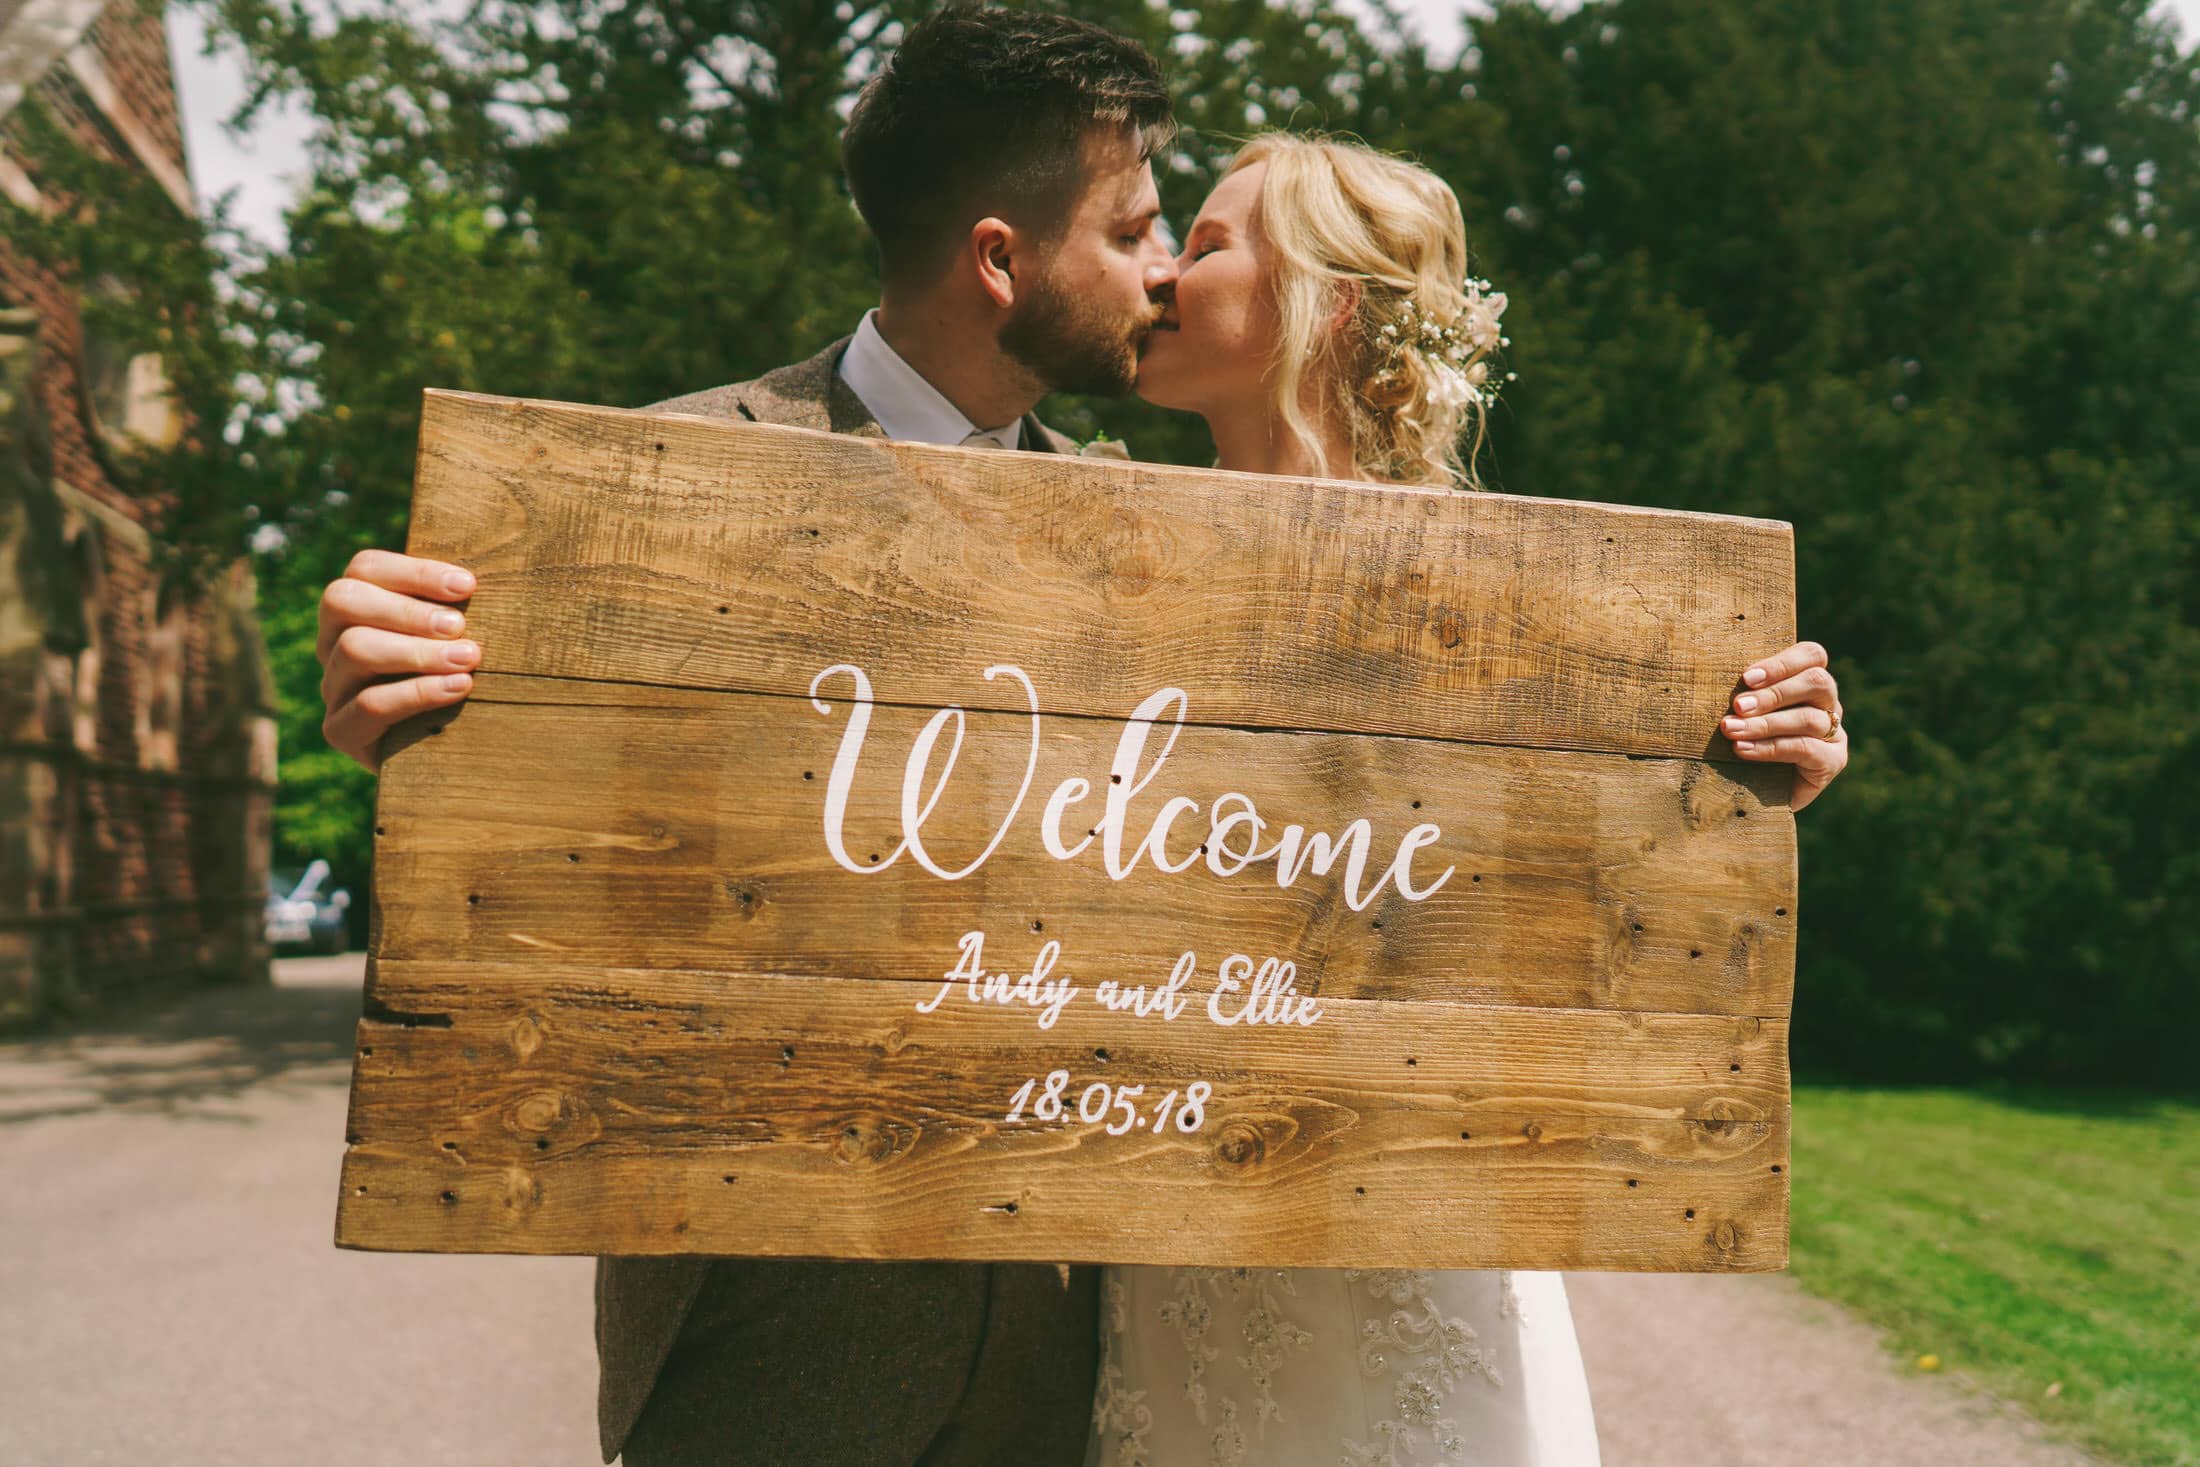 A Shropshire wedding couple sharing a kiss while holding a welcome sign.